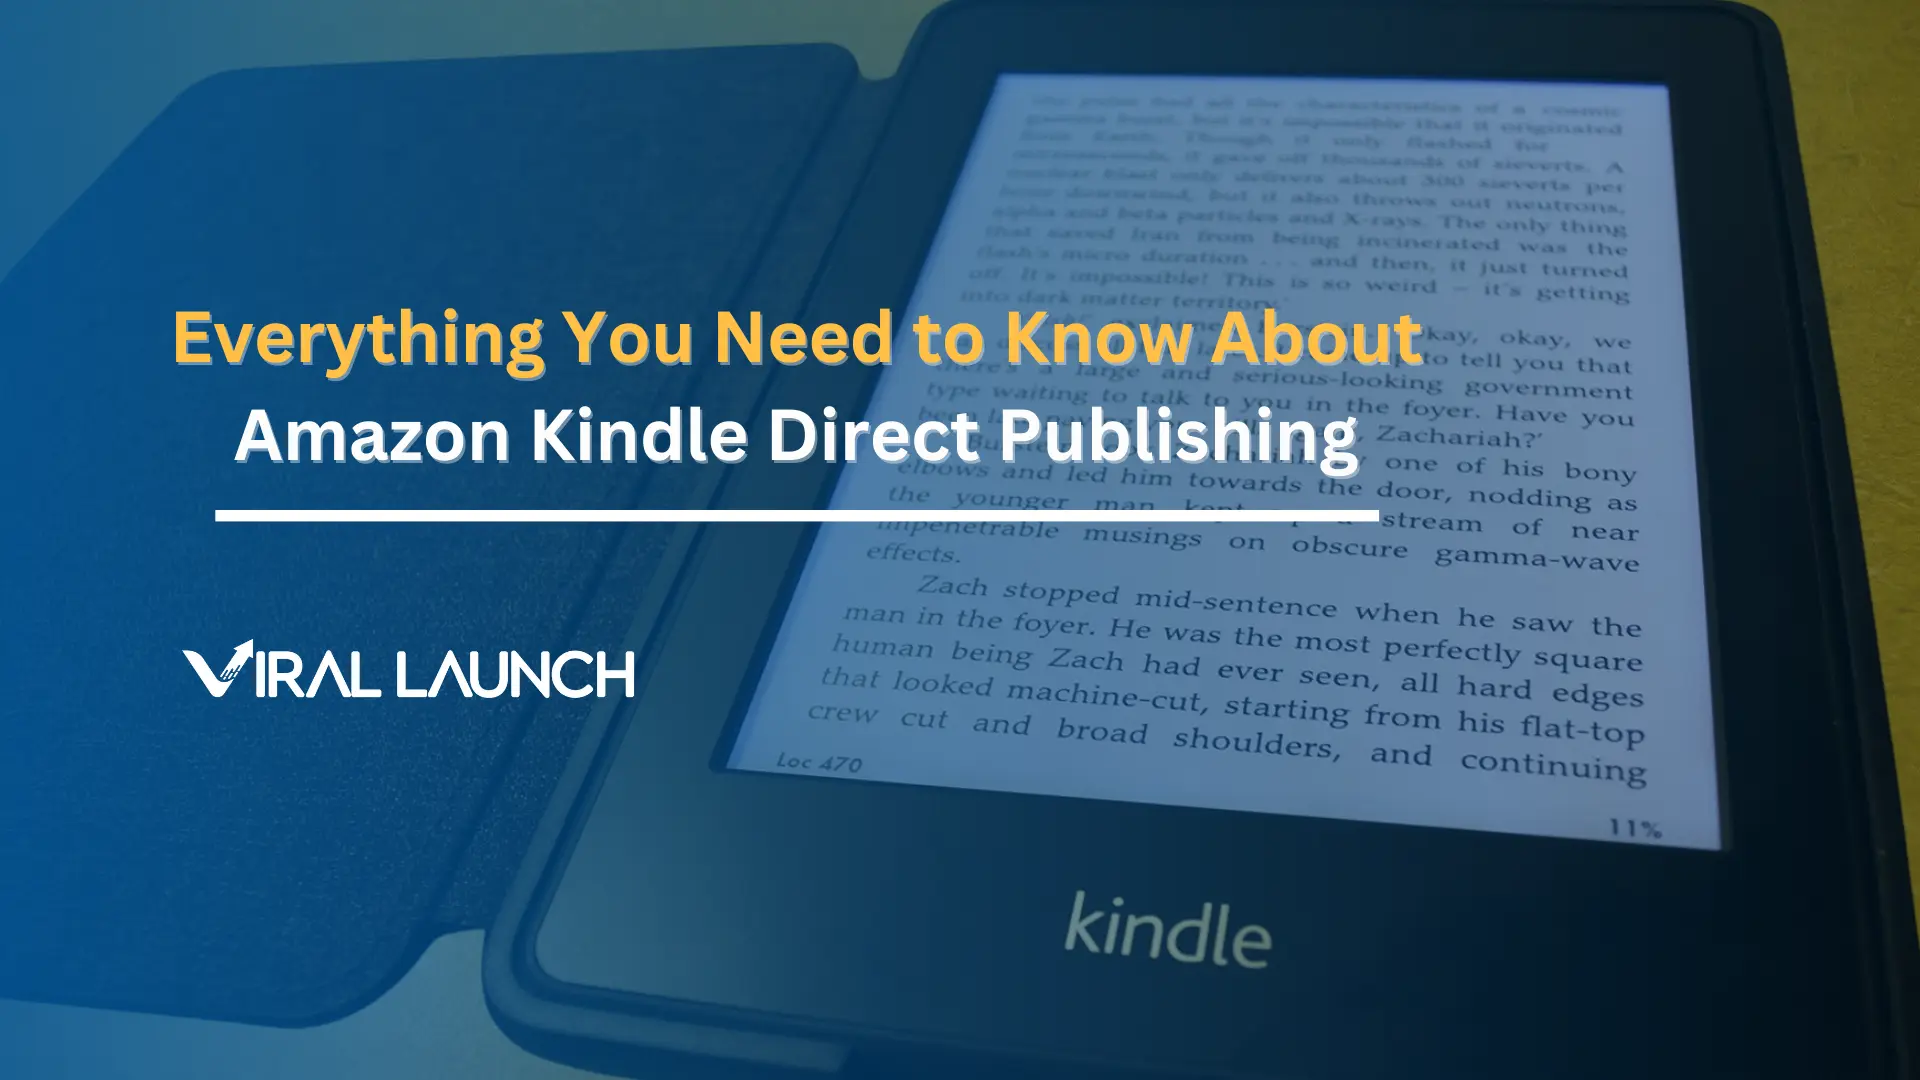 A graphic with an Amazon Kindle on it with a text overlay that says Amazon everything you need to know about Amazon Kindle Direct Publishing.